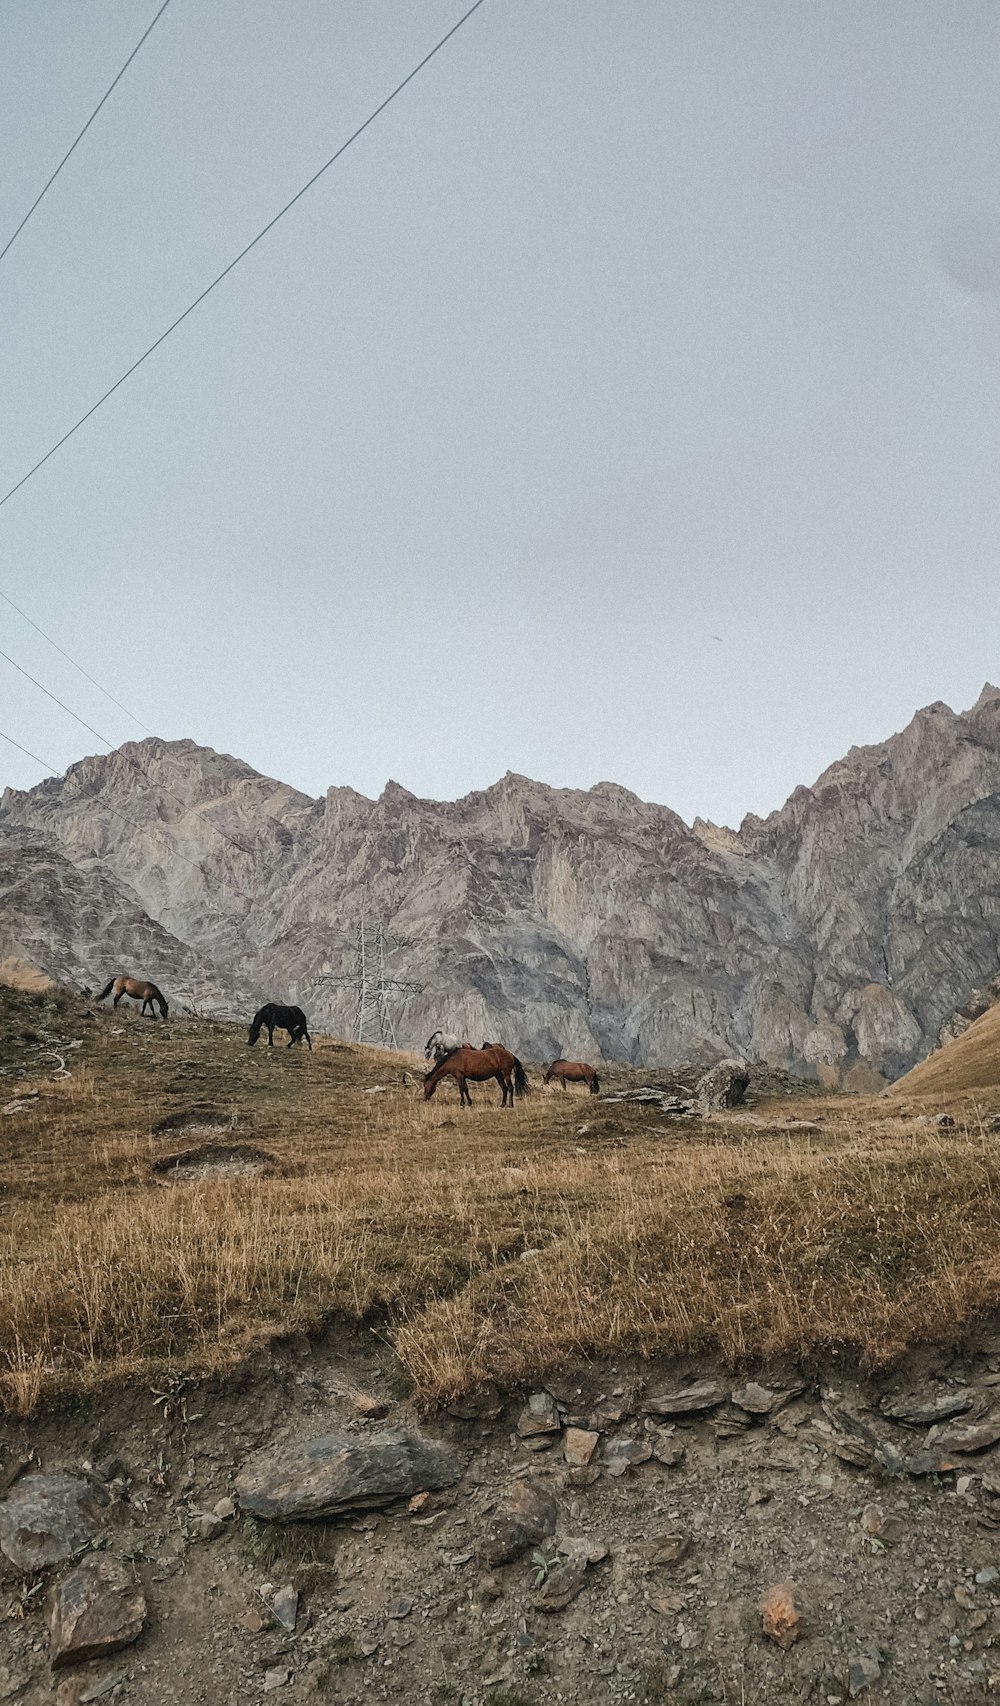 horses grazing in a field with mountains in the background